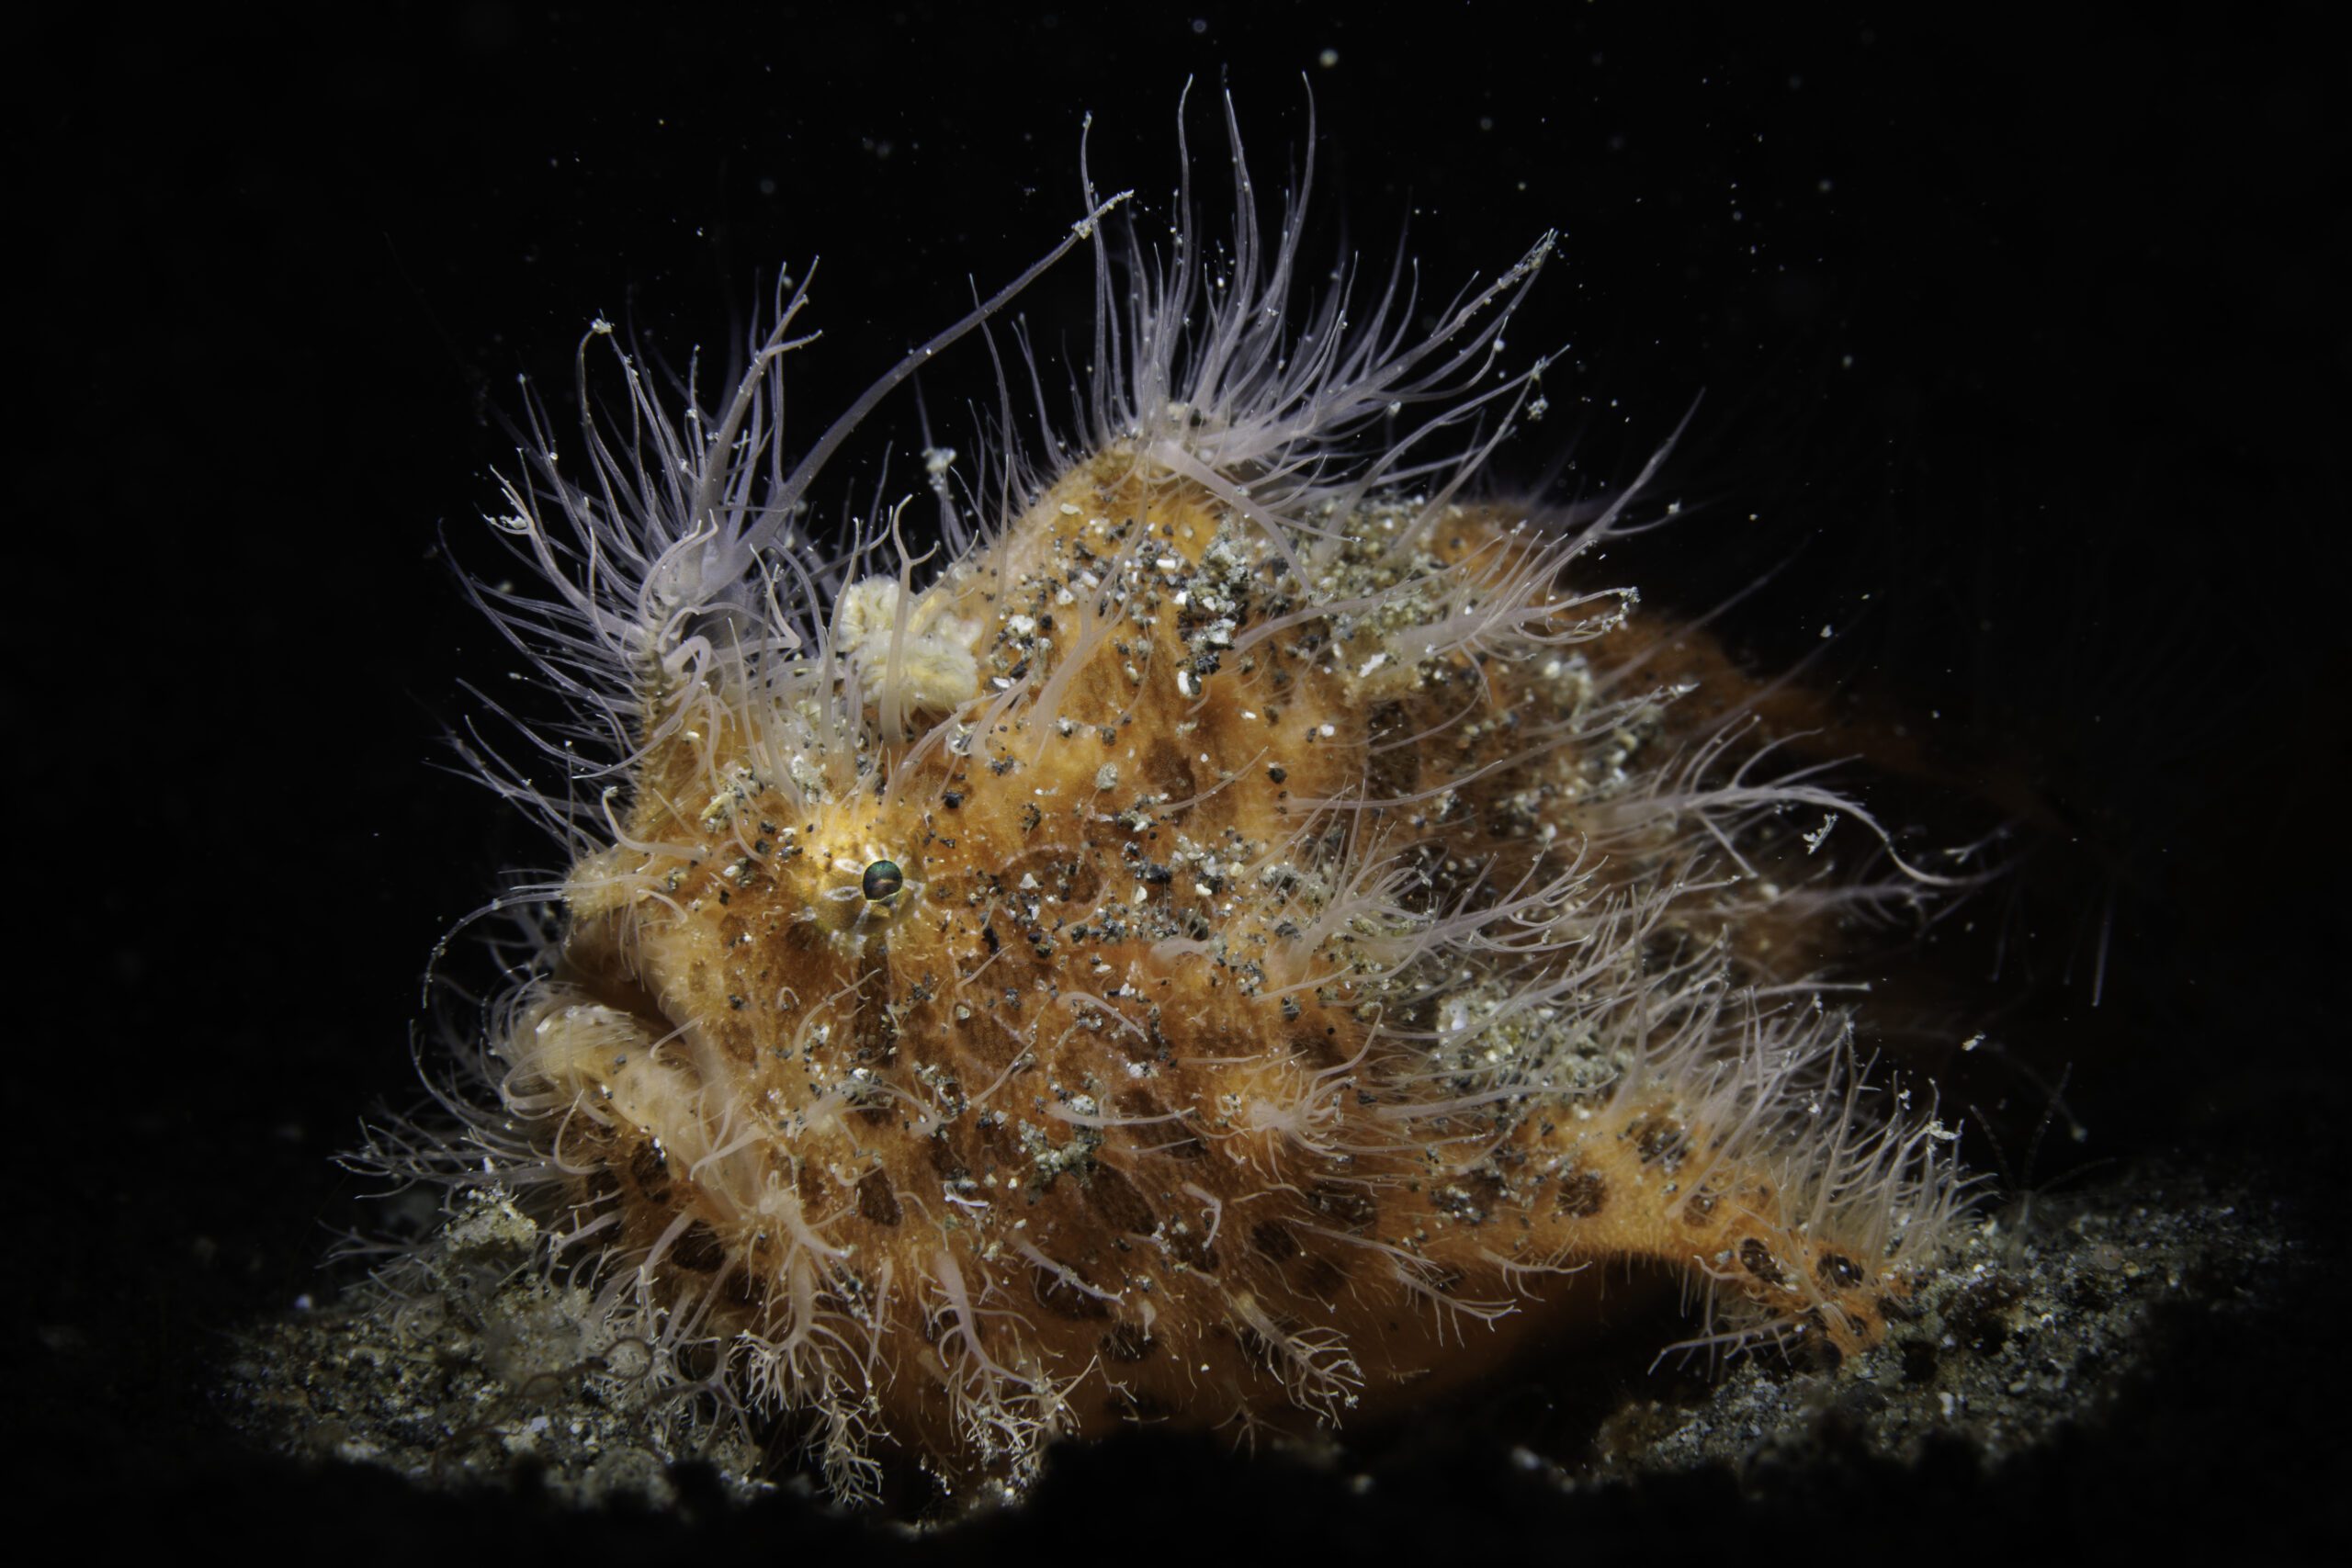 Women In Underwater Photography: Hairy Frogfish by Erin Quigley